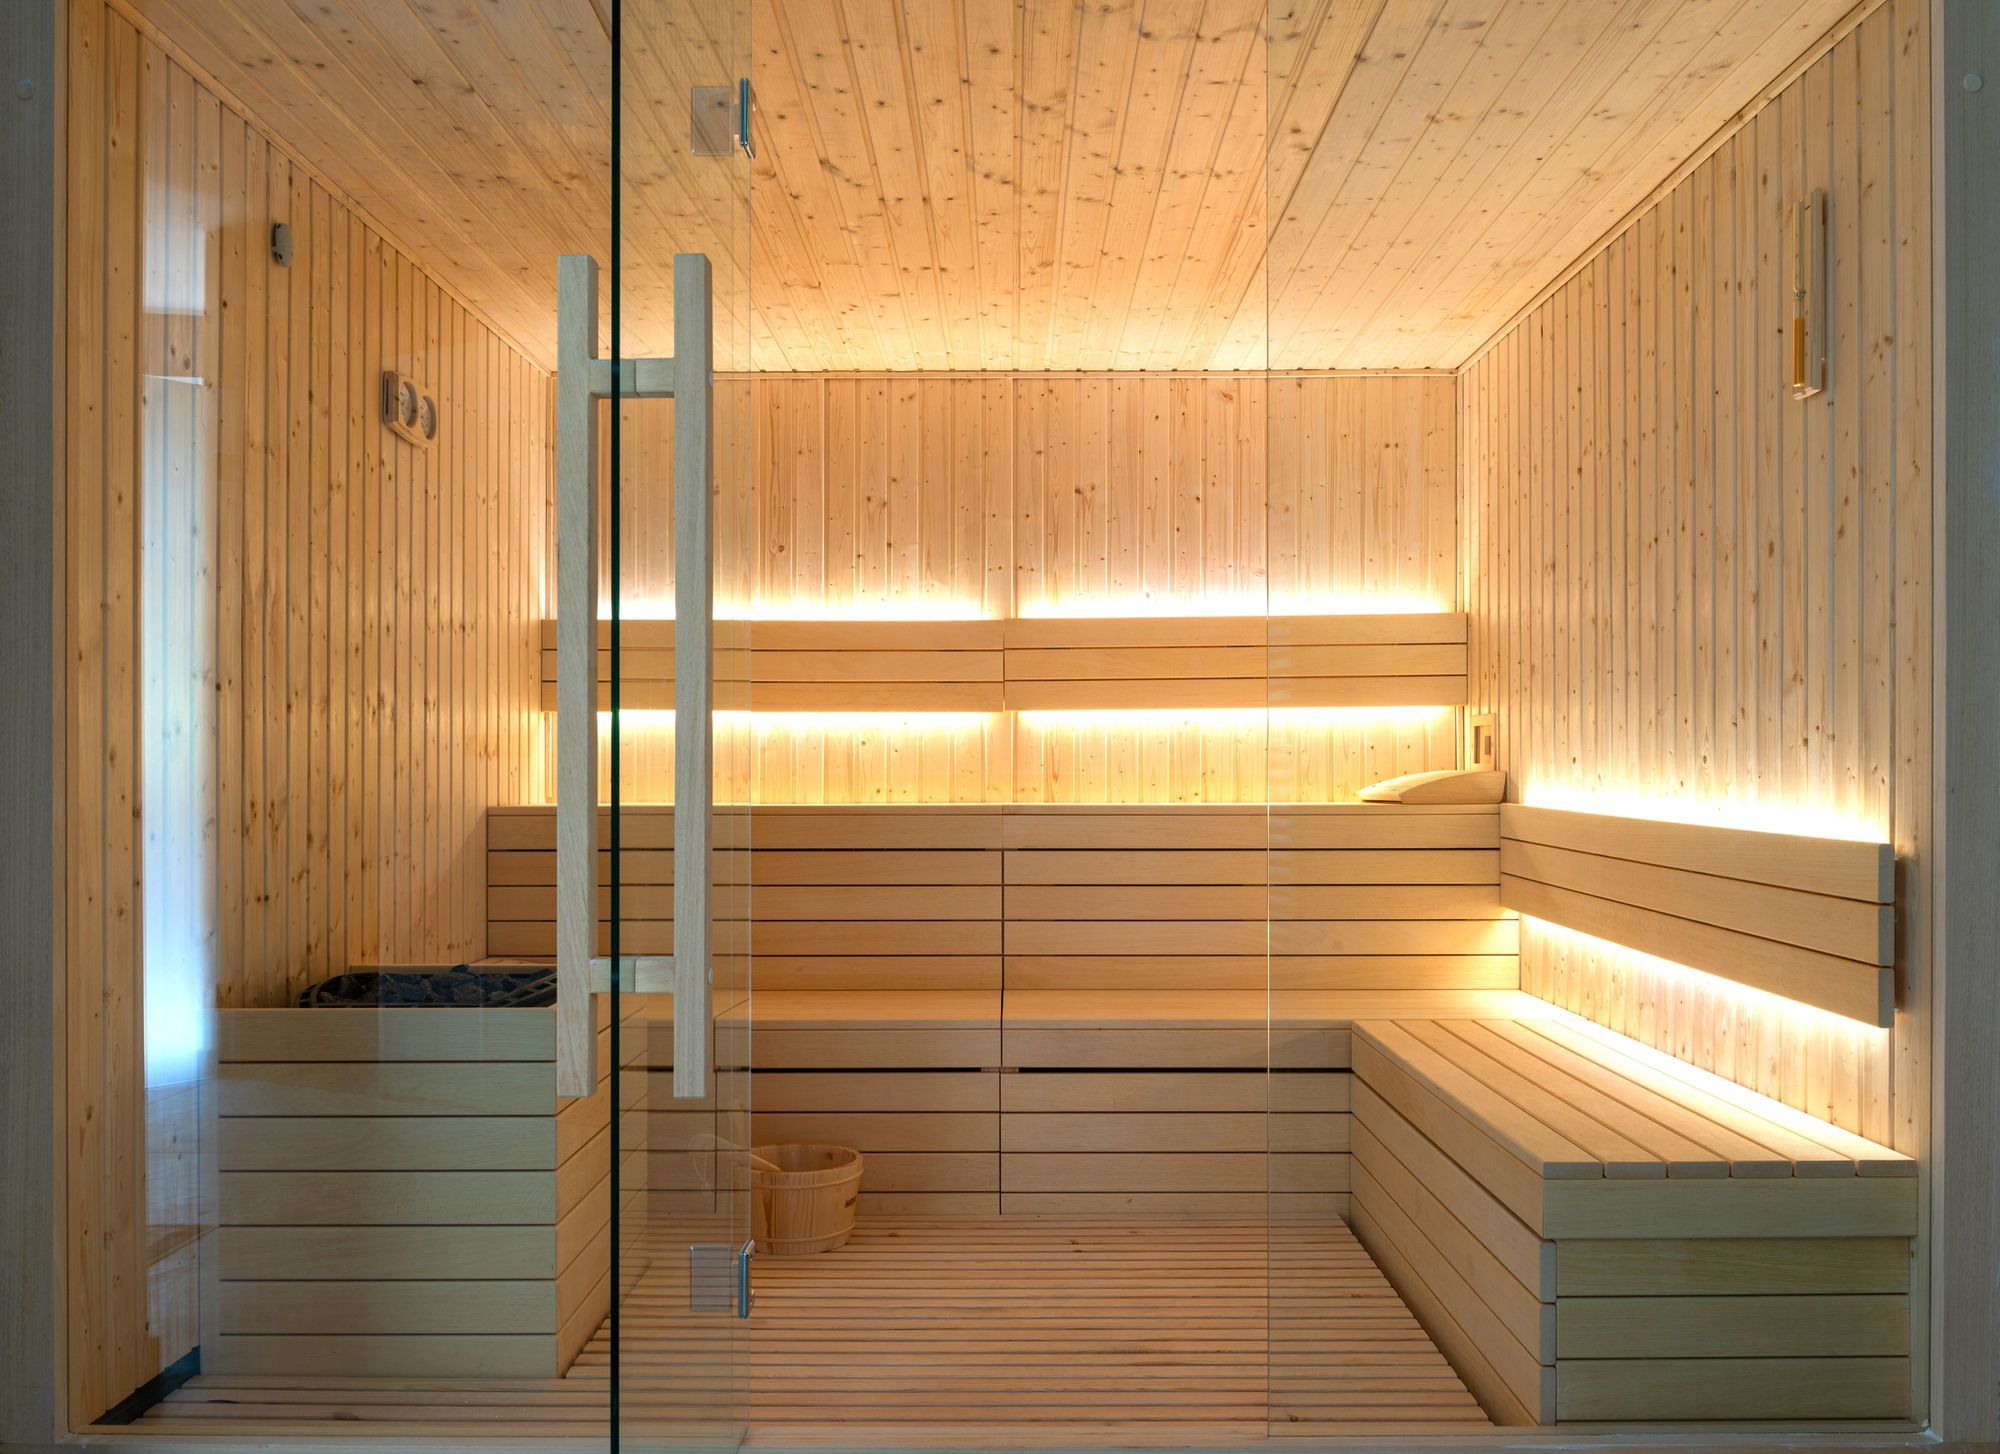 Hot or Cold on Sauna Exposure?